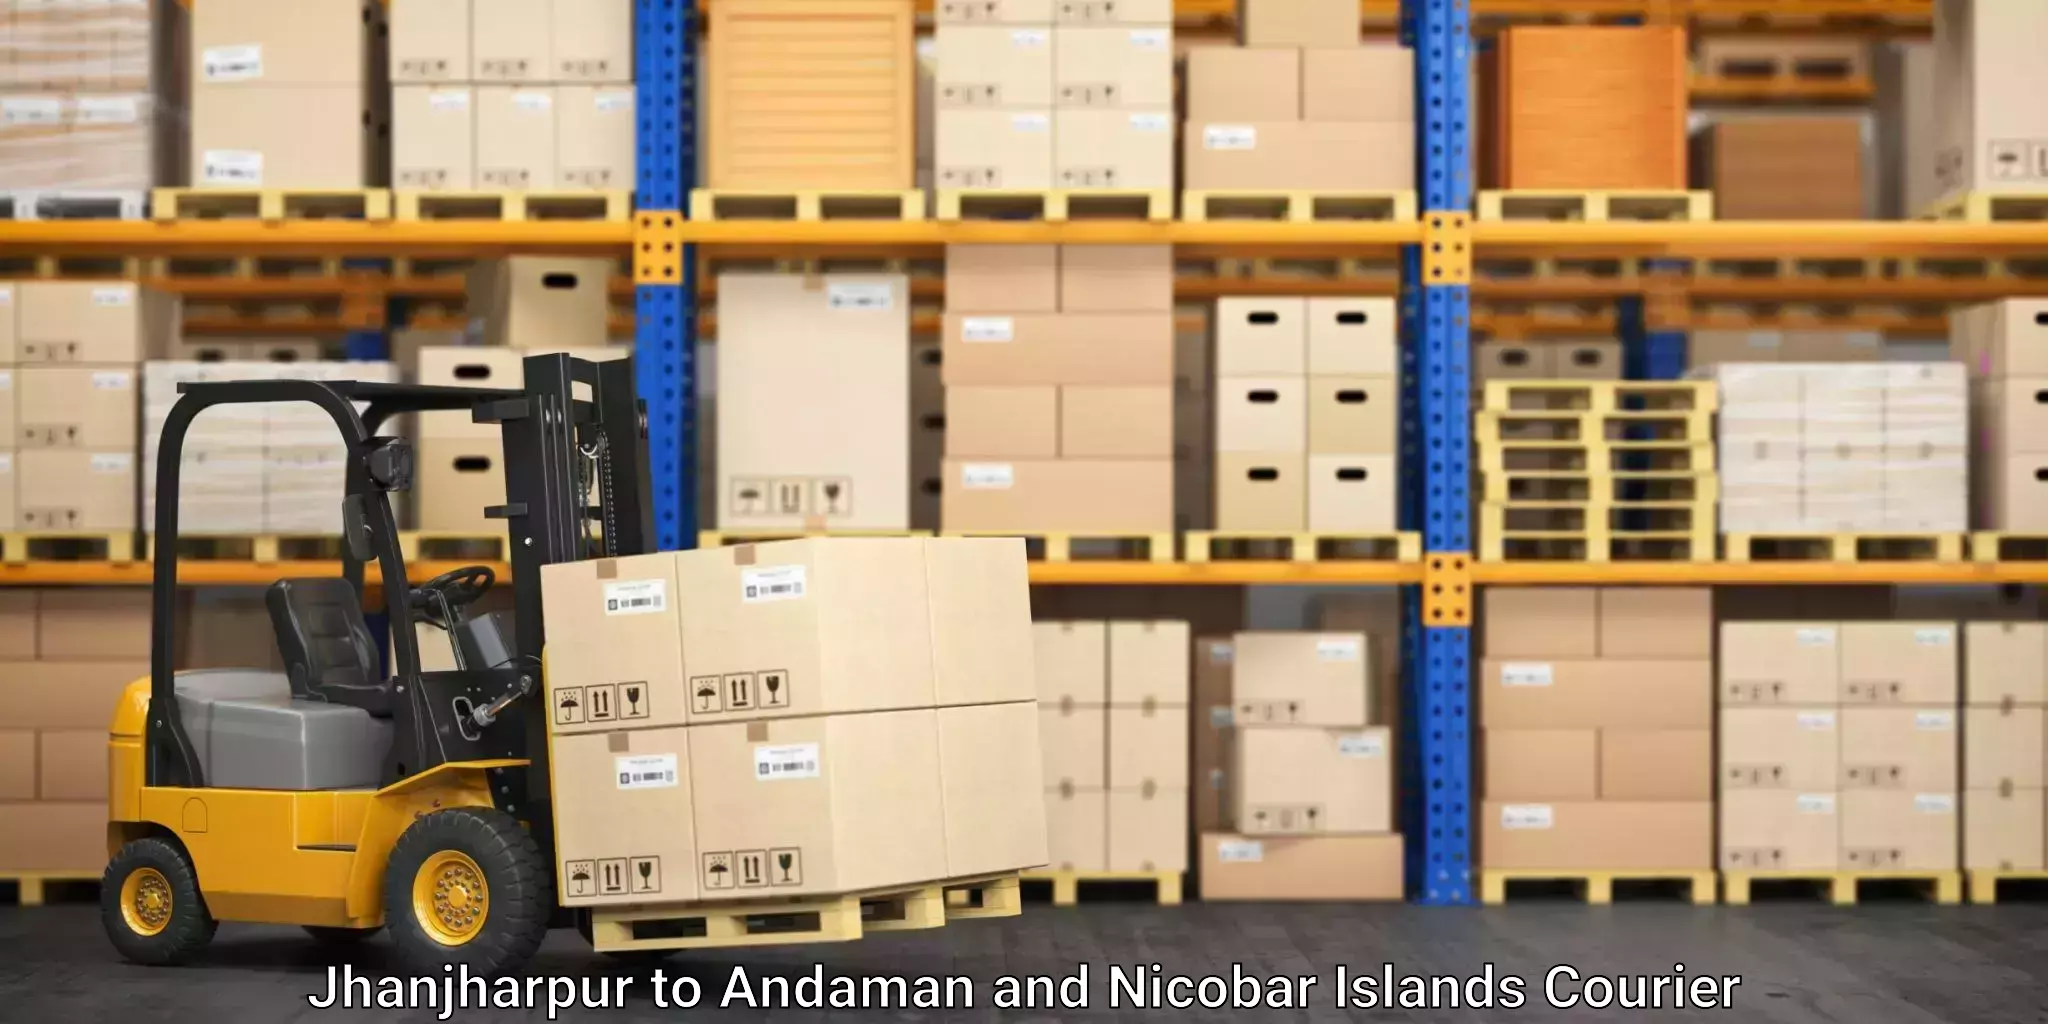 Furniture shipping services in Jhanjharpur to Andaman and Nicobar Islands